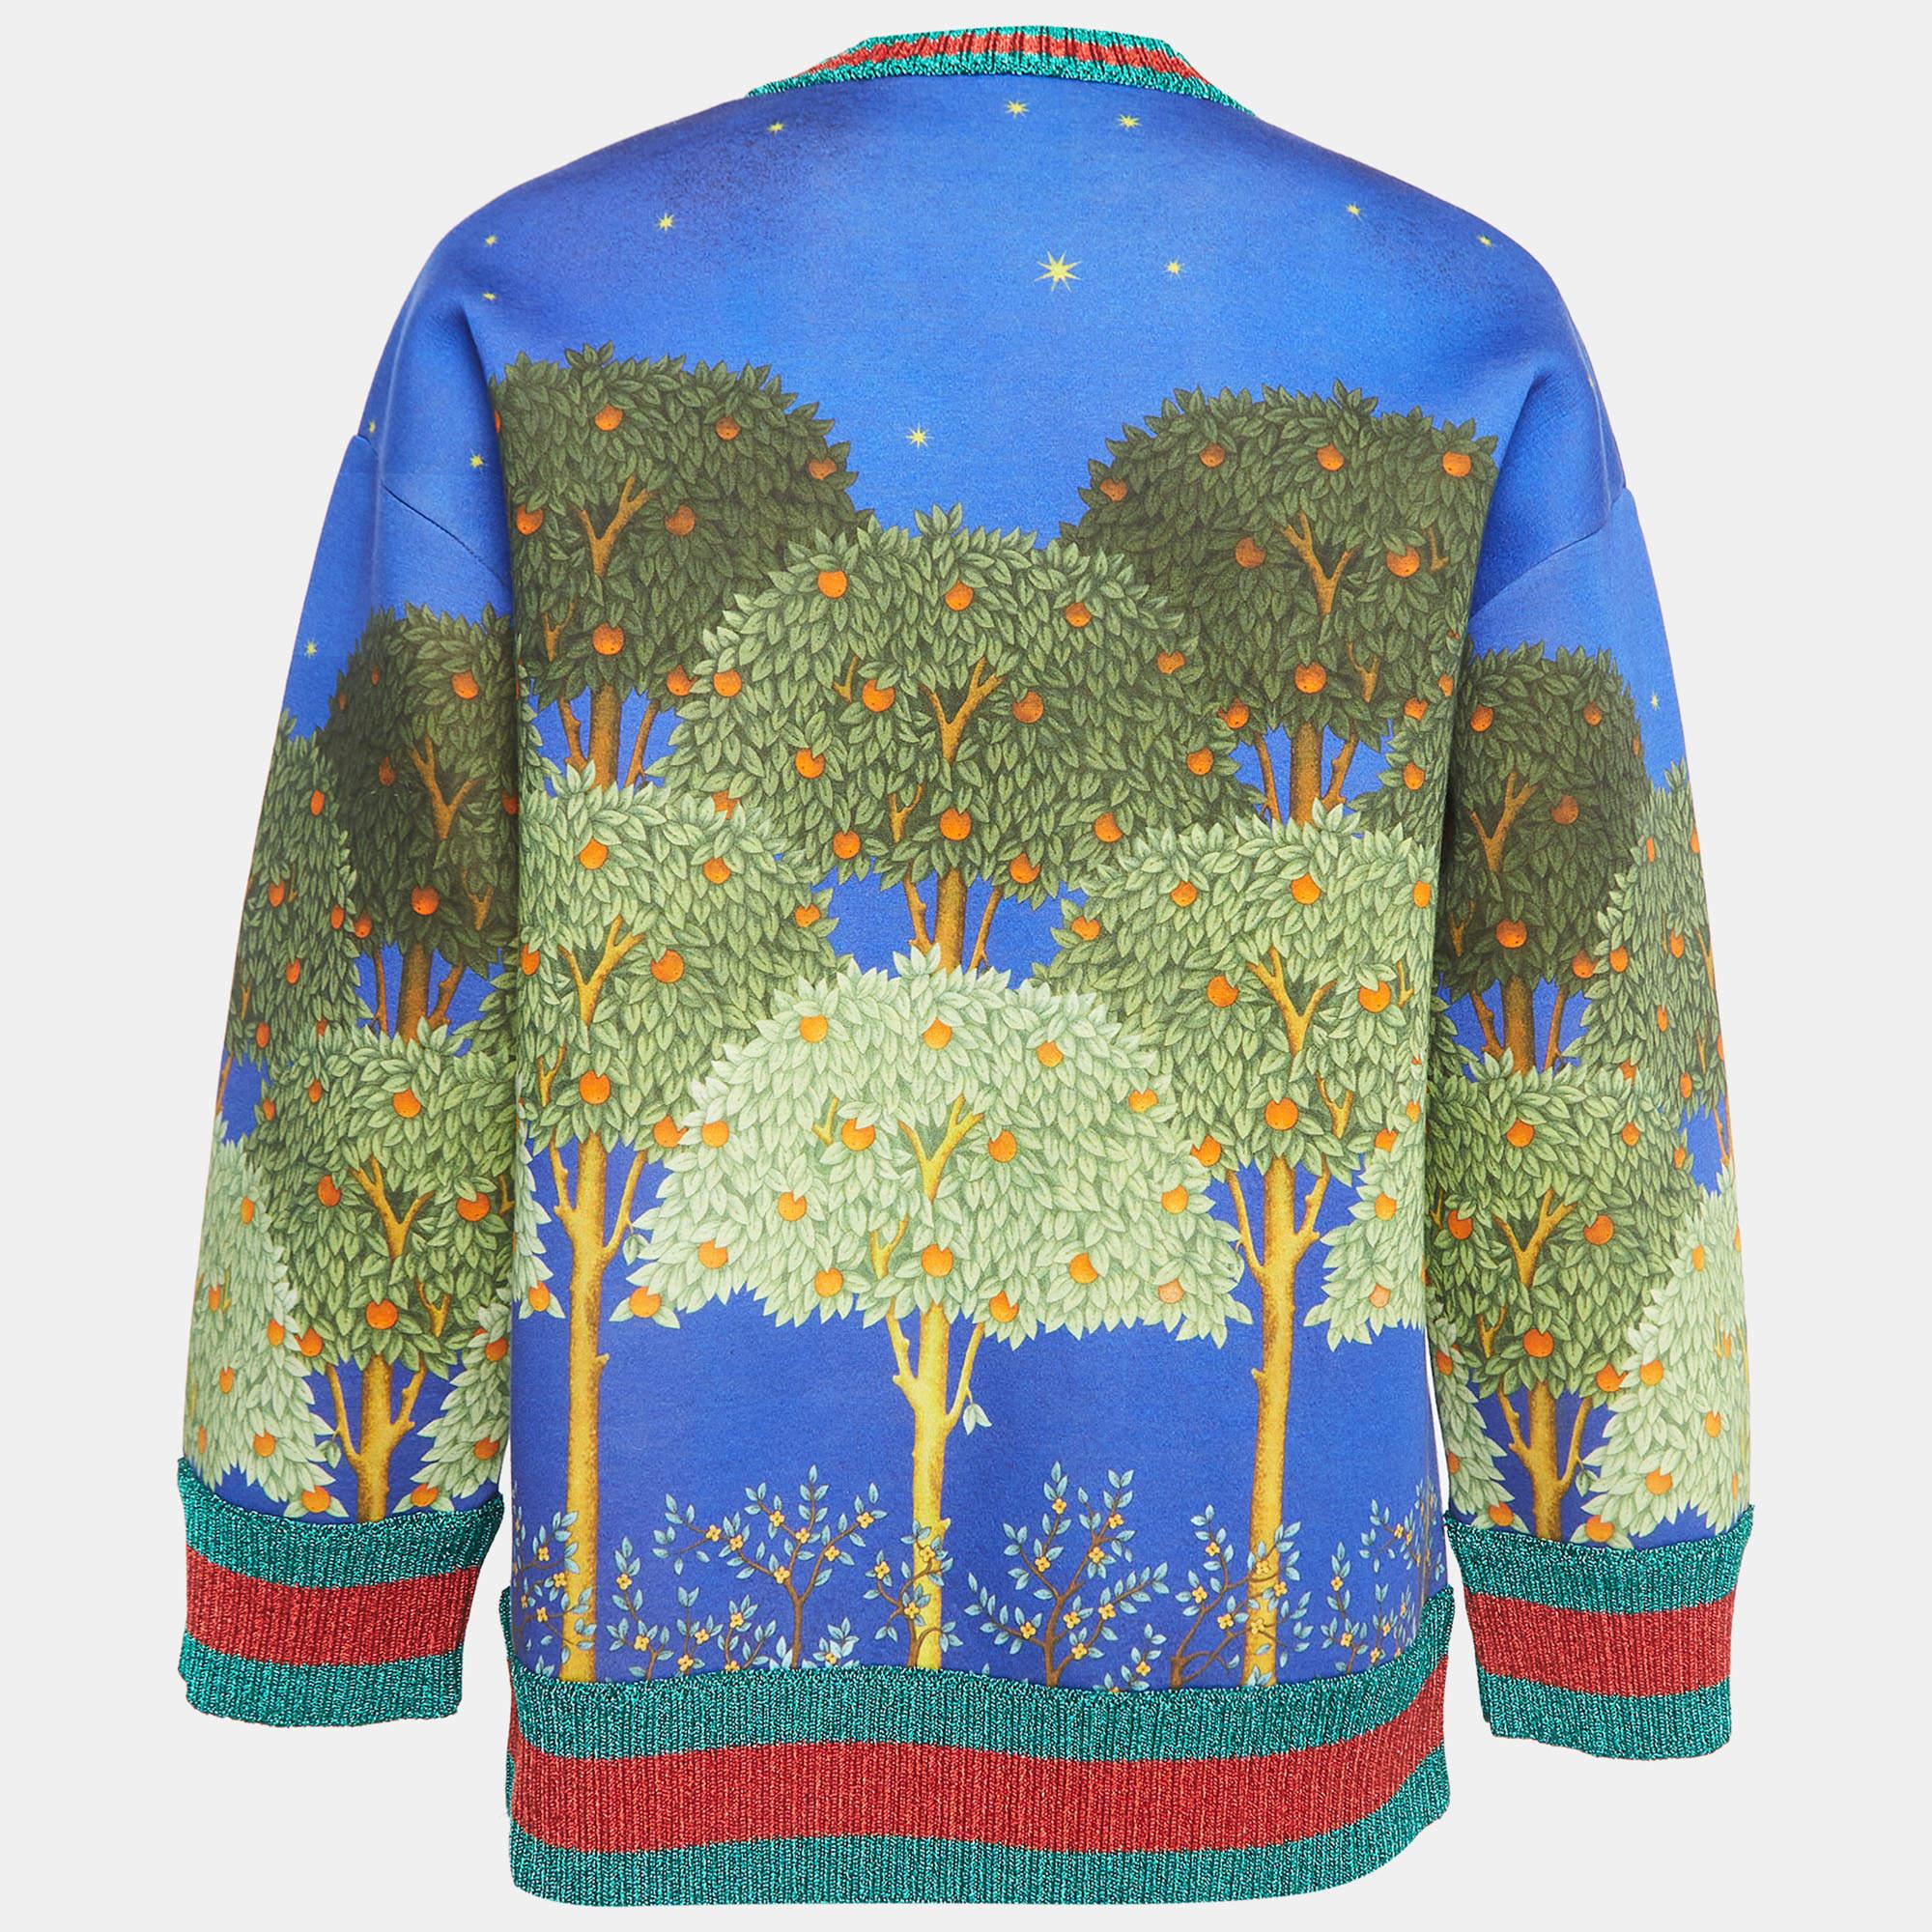 Each of Gucci's creations exhibits signature beauty, elegance, and luxury. This sweater from Gucci will make a luxurious addition to your closet. It is made from cotton fabric, with a multicolored Night Garden print augmenting its silhouette. It has